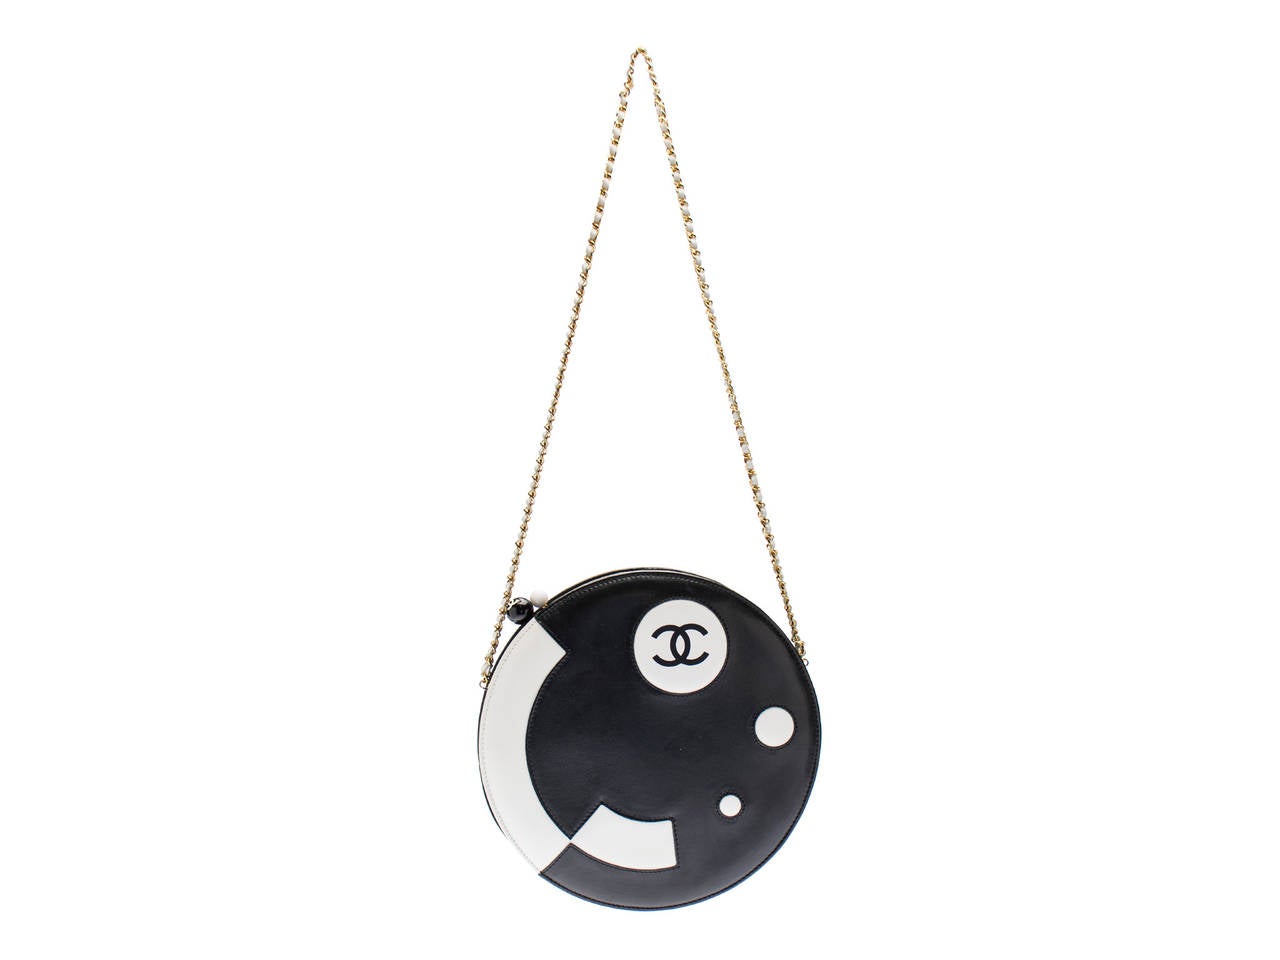 Extremely rare! Chanel ying yang bag is featured in black and white with a Japanese like feel with two white circles on the front as well as the iconic Chanel logo. Kiss lock closure in black and white resin. Can be carried as a clutch or shoulder